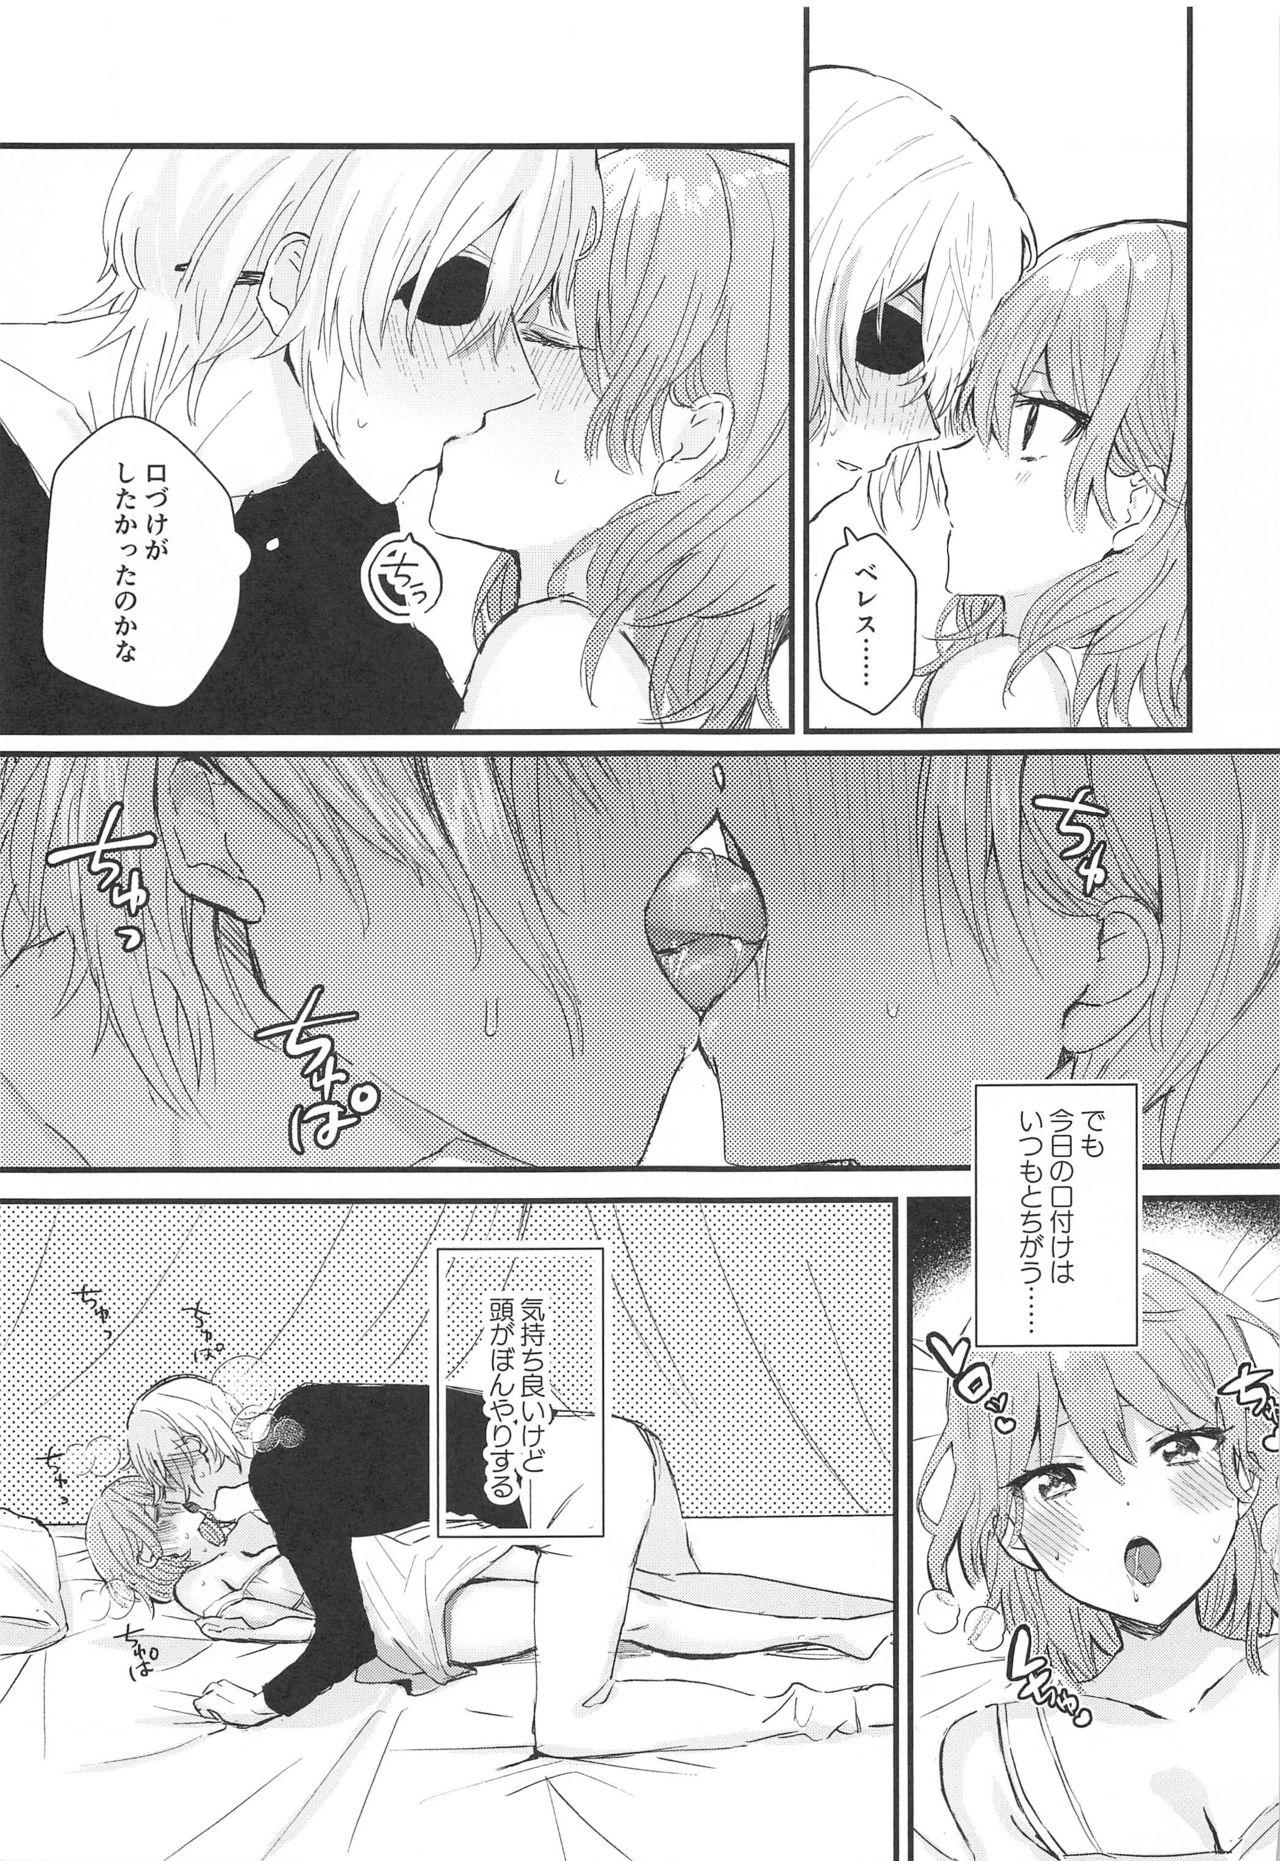 Groupsex Sensei no Hatena - What the professor doesn't know - Fire emblem three houses Cavala - Page 6